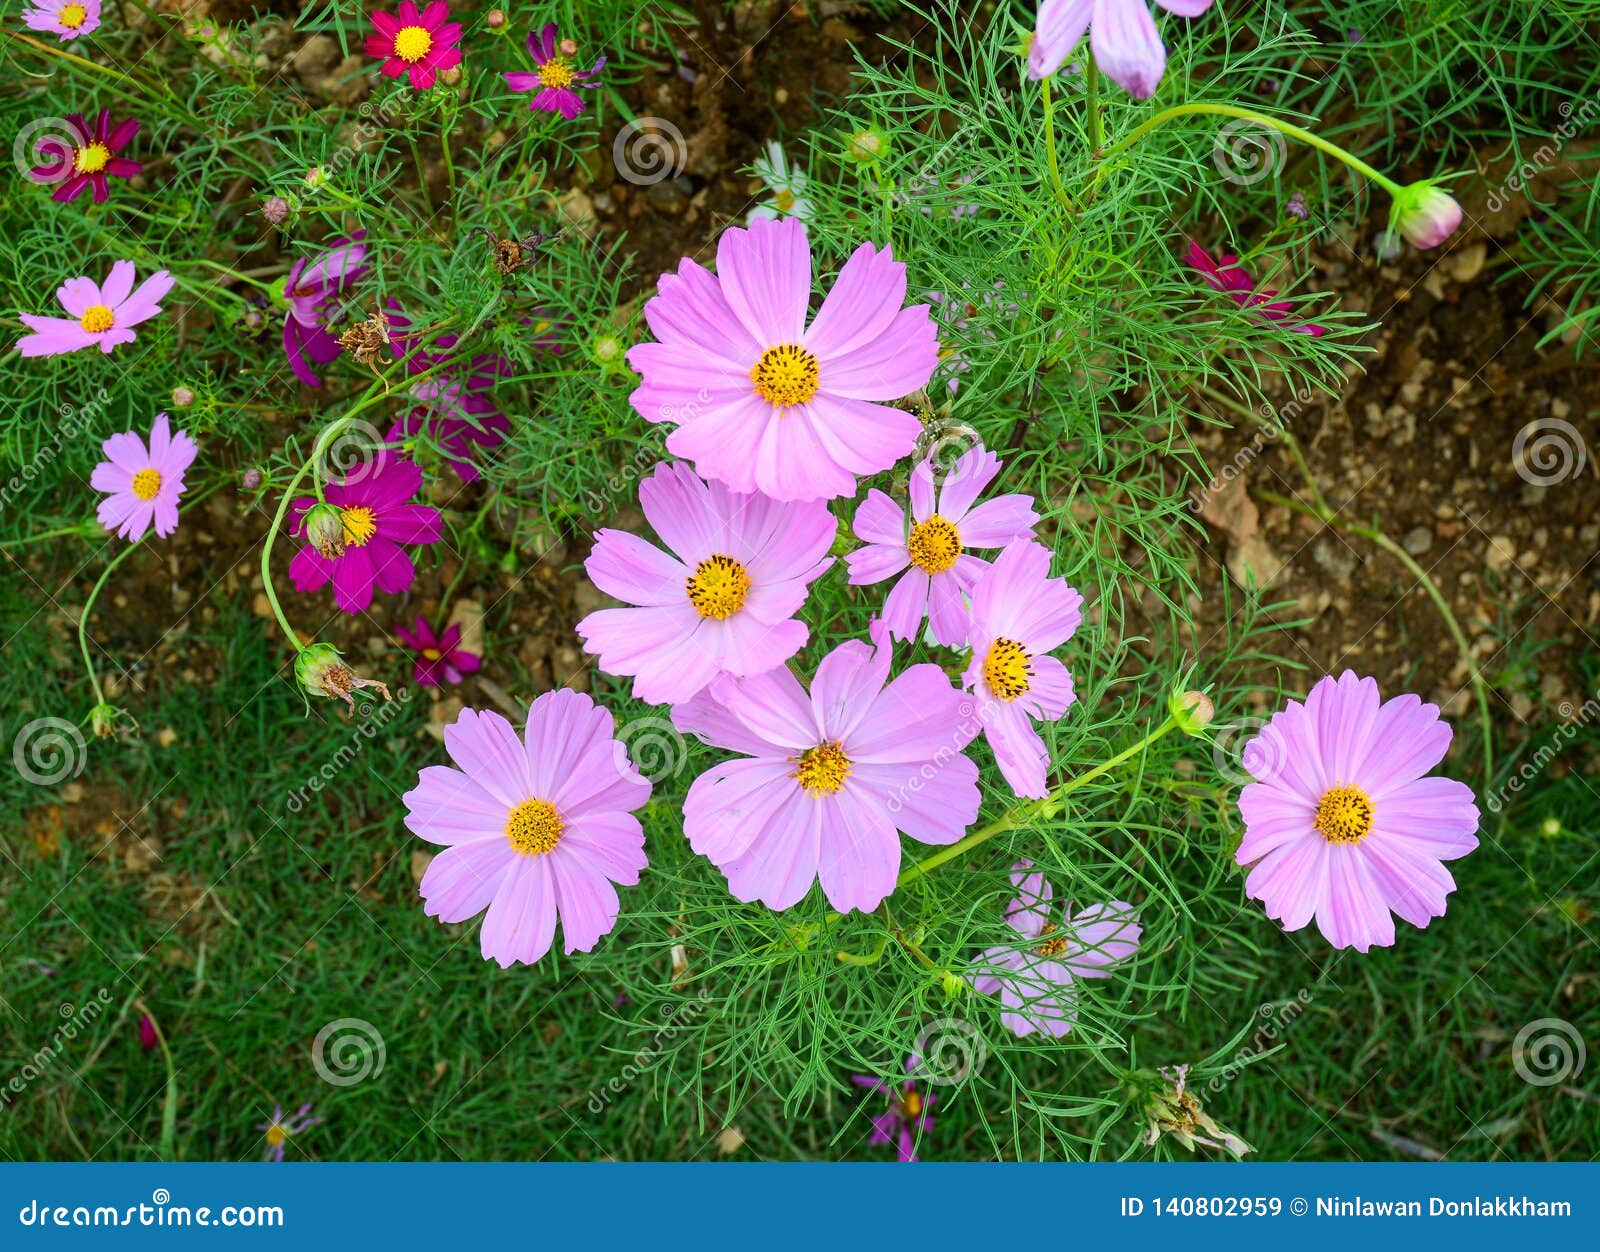 Purple Cosmos Flower Blooming At Garden Stock Image Image Of Golden Floral 140802959